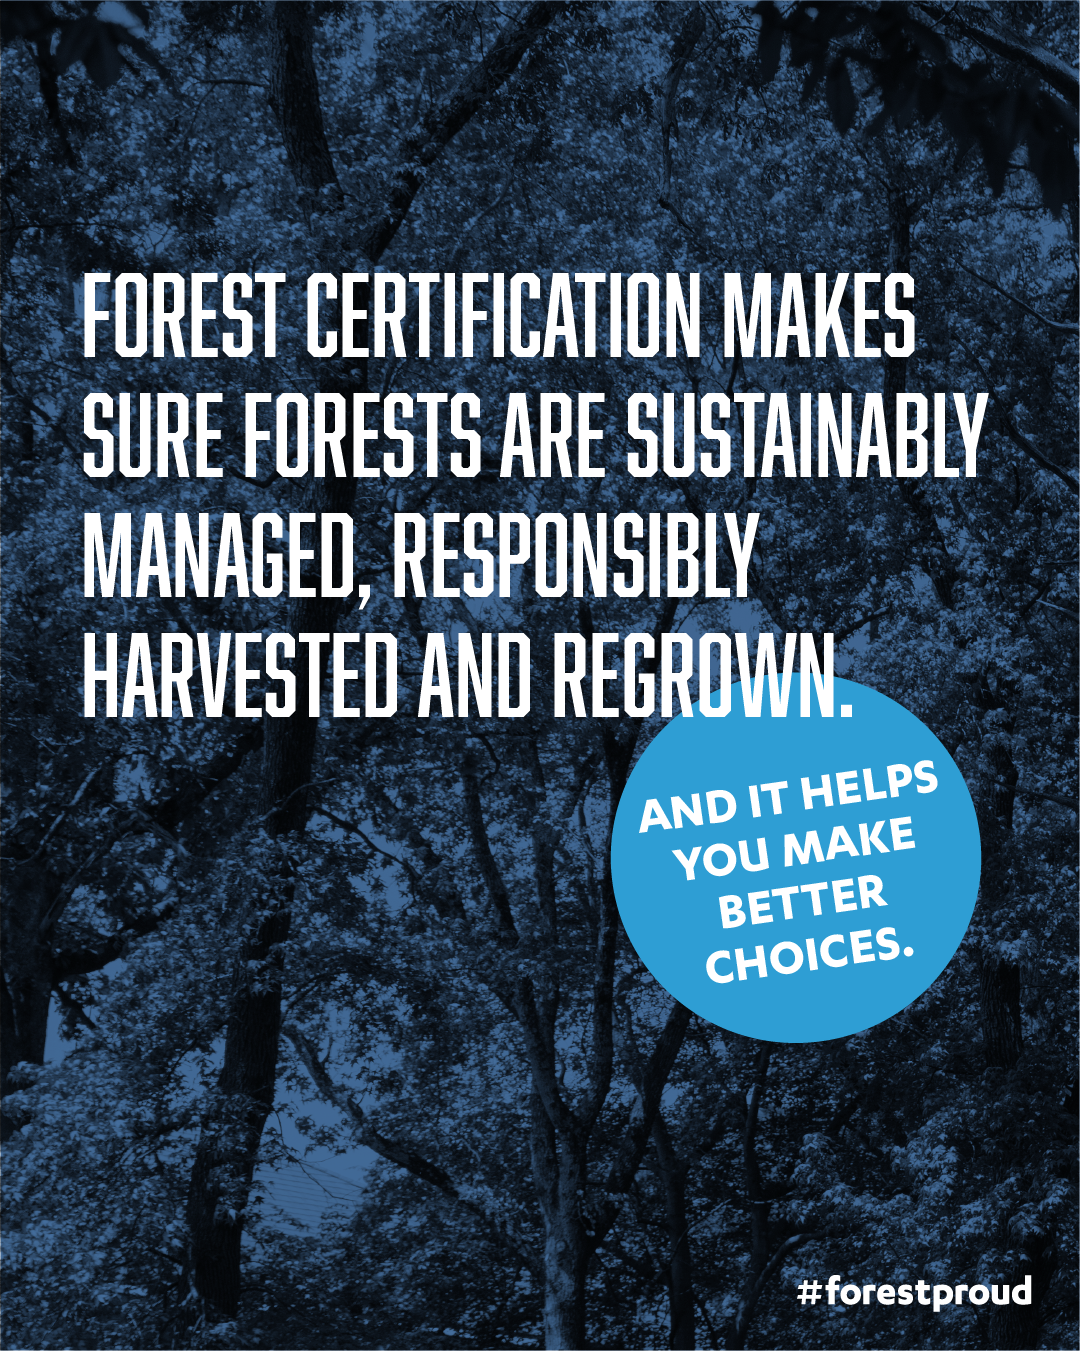 Forest certification helps you make better choices